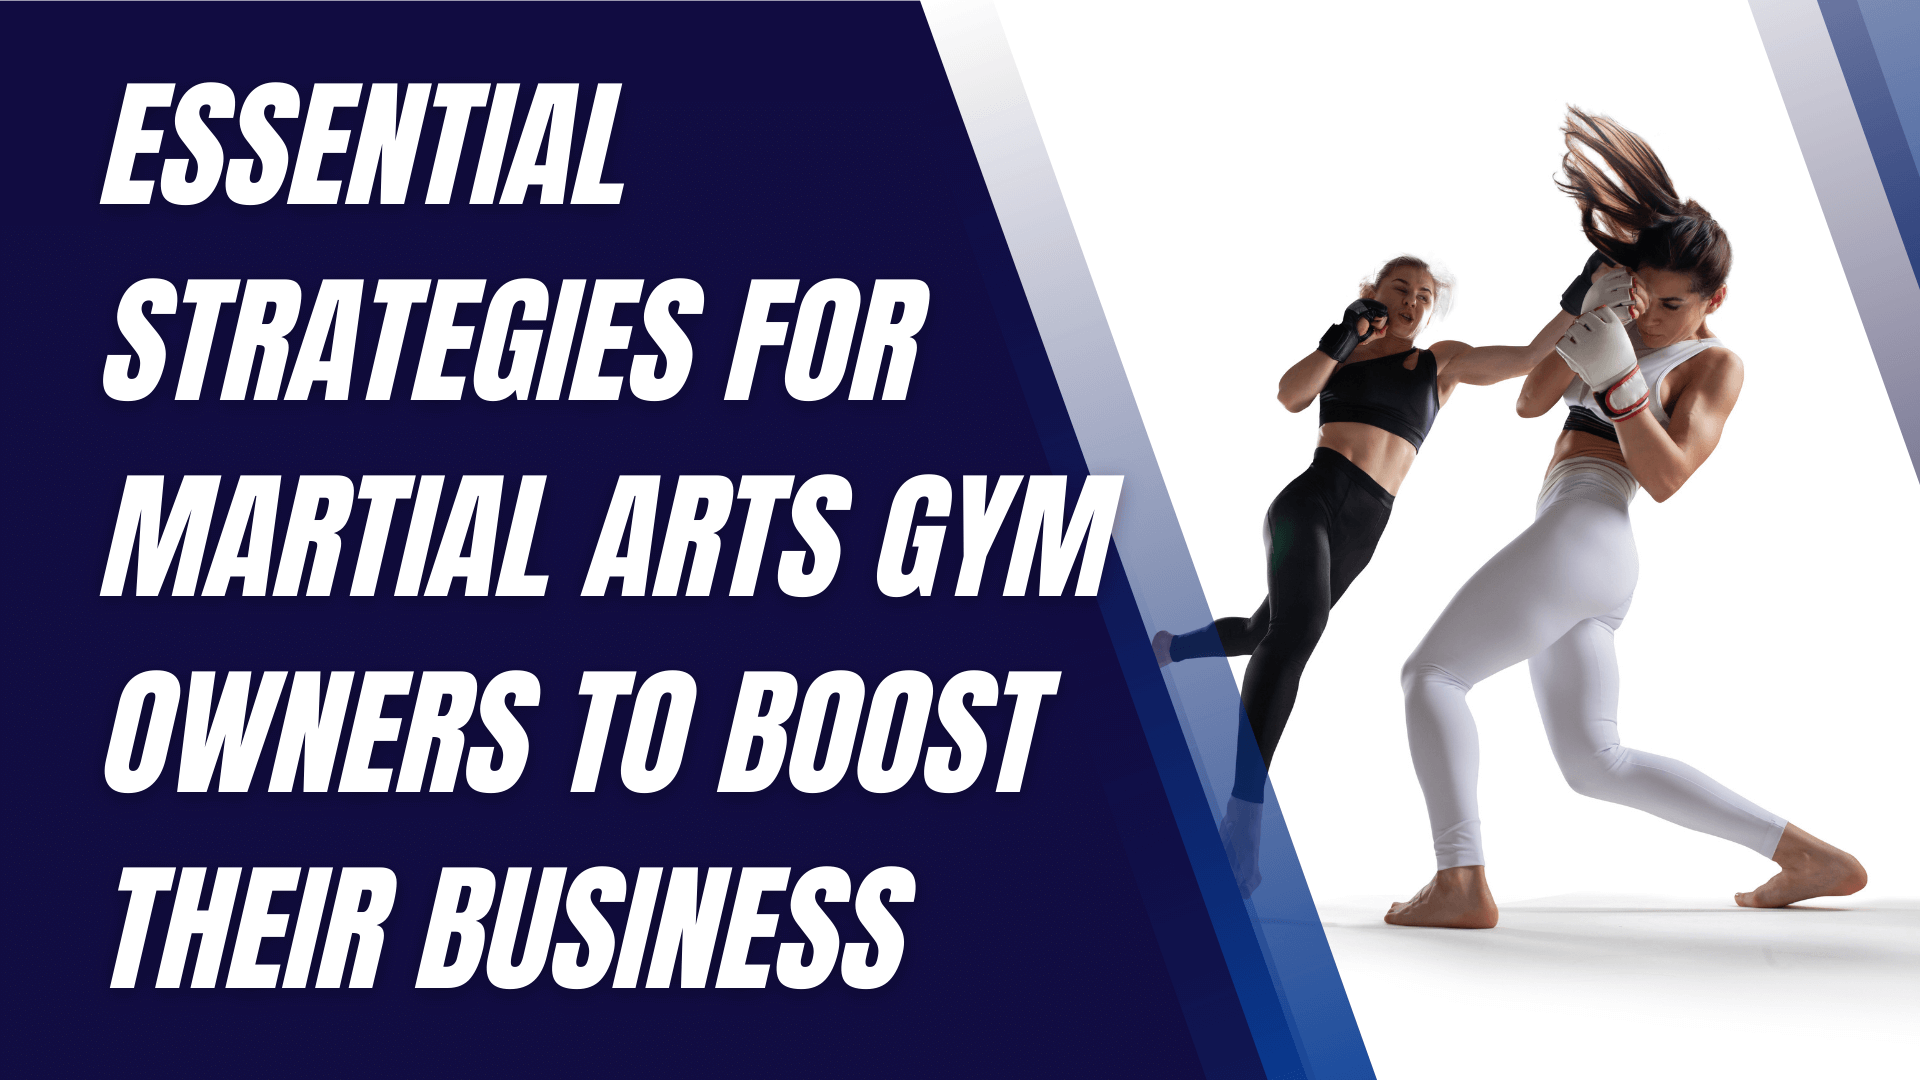 Essential Strategies for Martial Arts Gym Owners to Boost Their Business